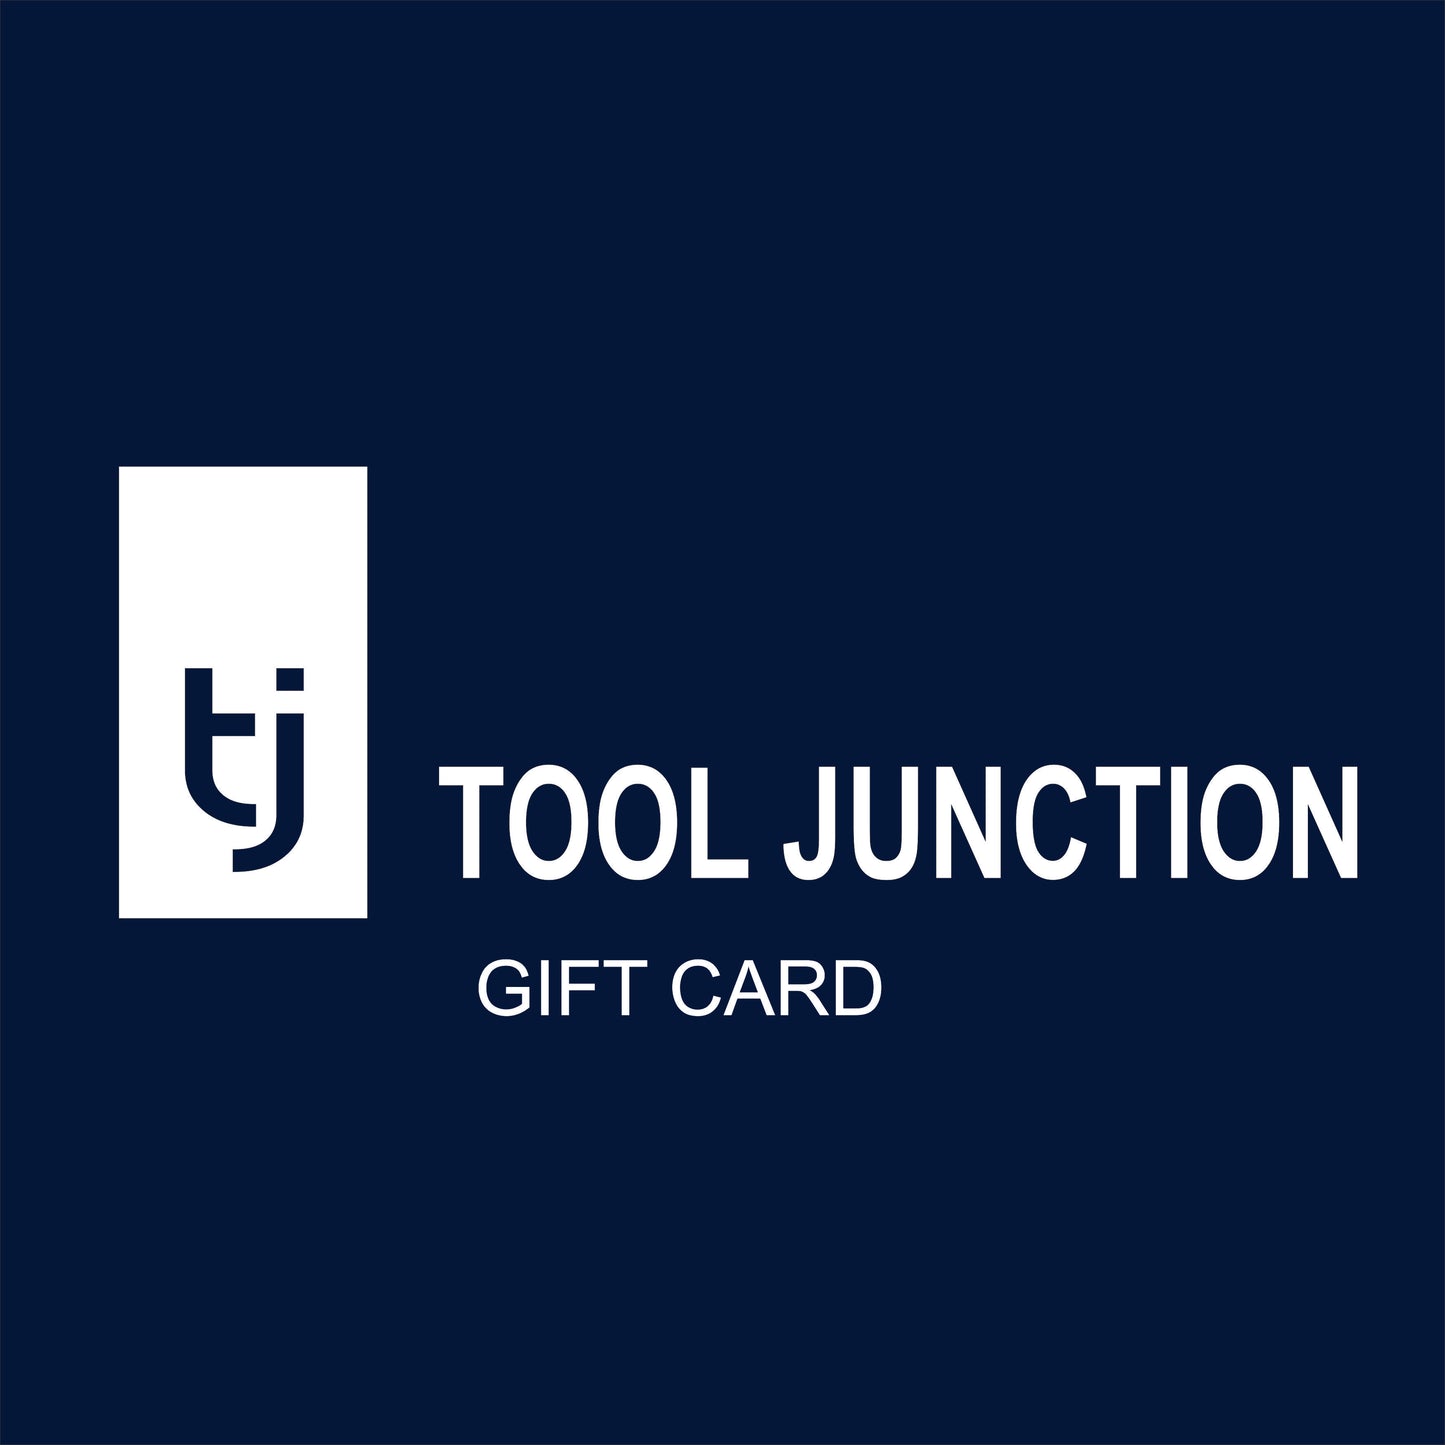 Tool Junction Gift Card tool-junction-nz